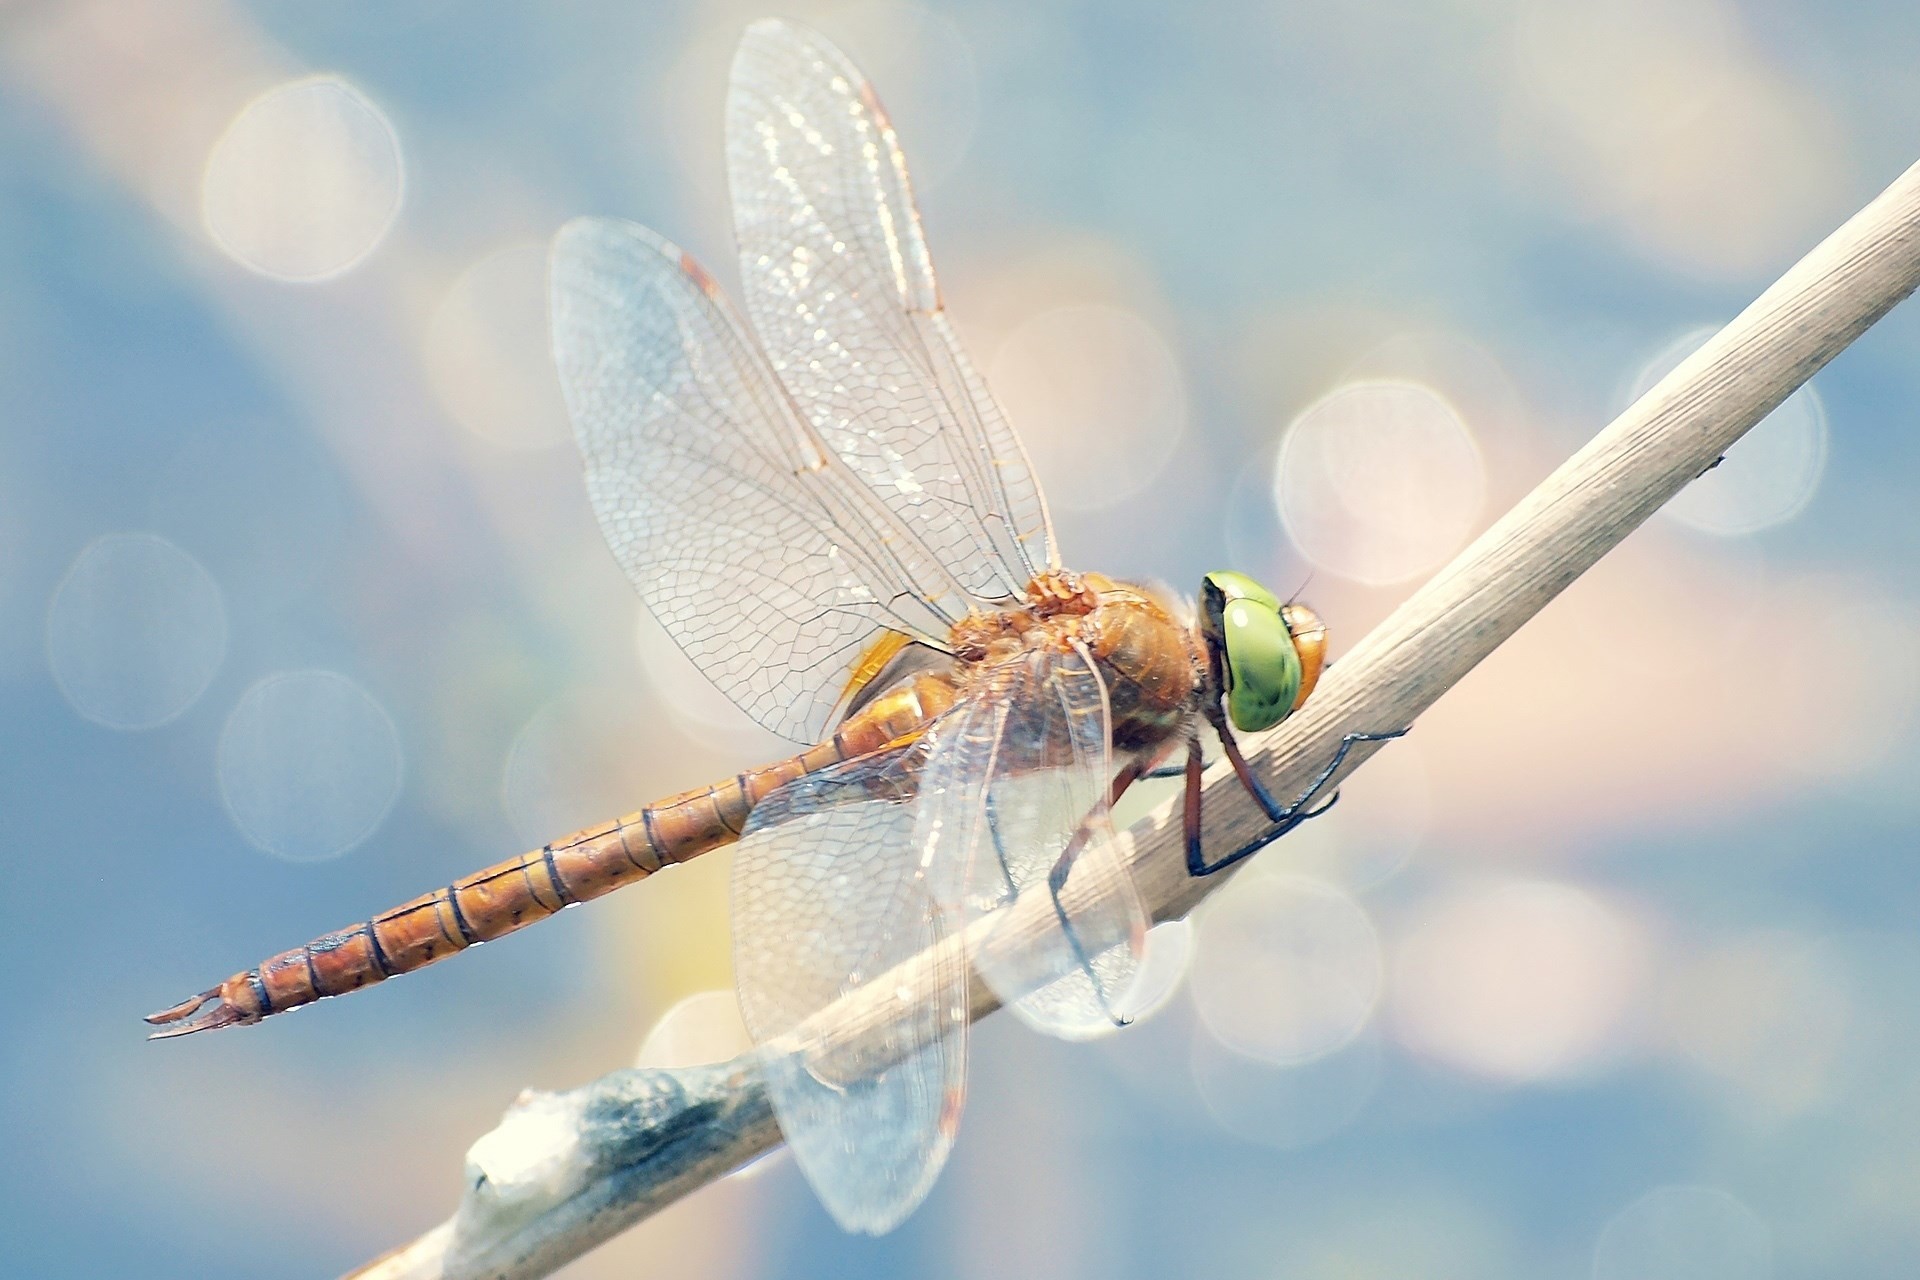 1920x1280 1920x1080 free screensaver wallpapers for dragonfly.  widescreen  hd dragonfly